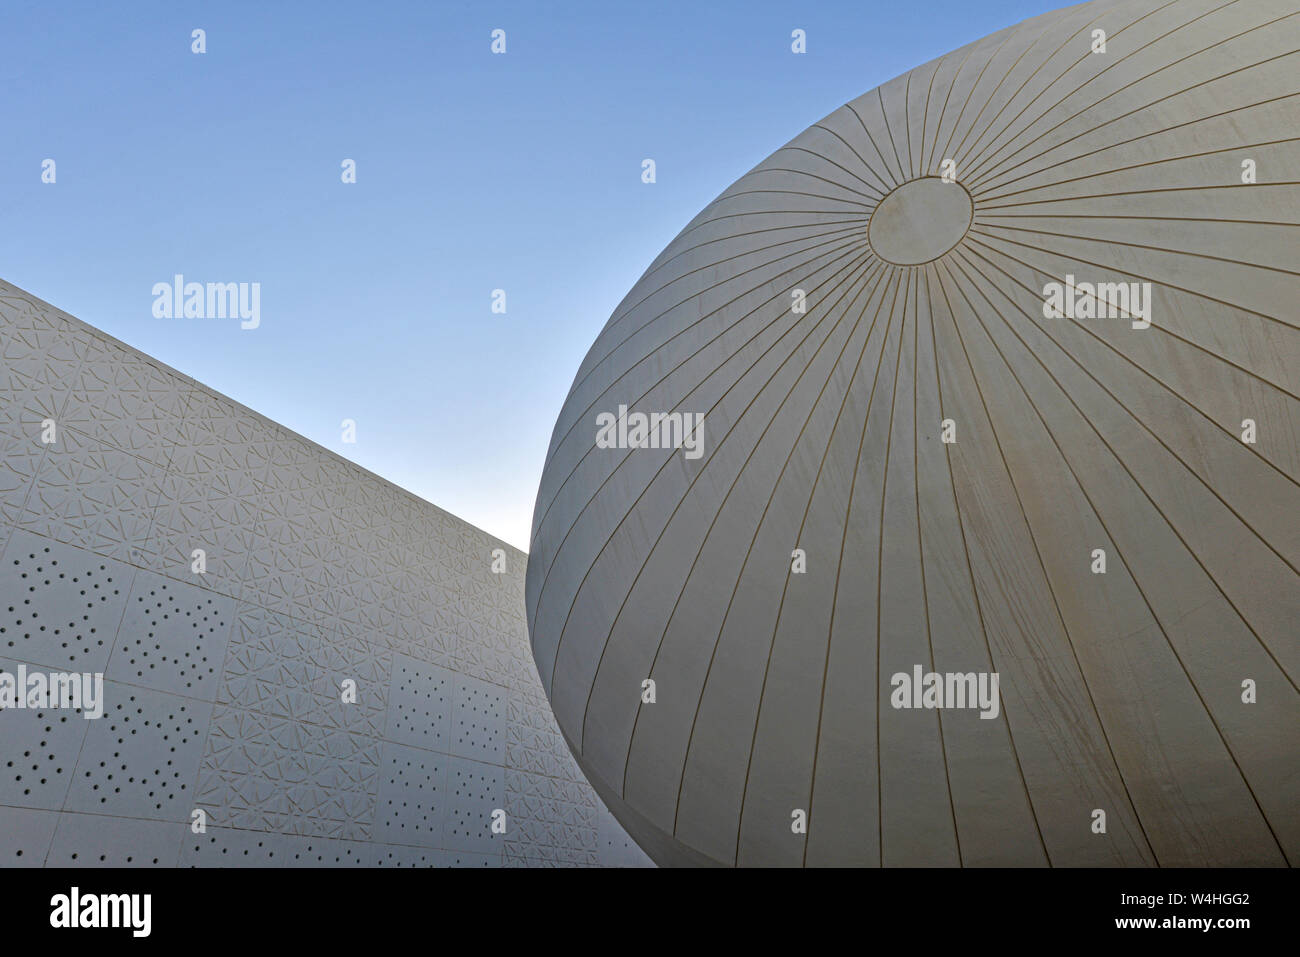 DOHA, QATAR - JANUARY 1, 2016: Detail of an egg shape structure of the Weill Cornell Medical College, Education City, designed by Arata Isozaki, archi Stock Photo